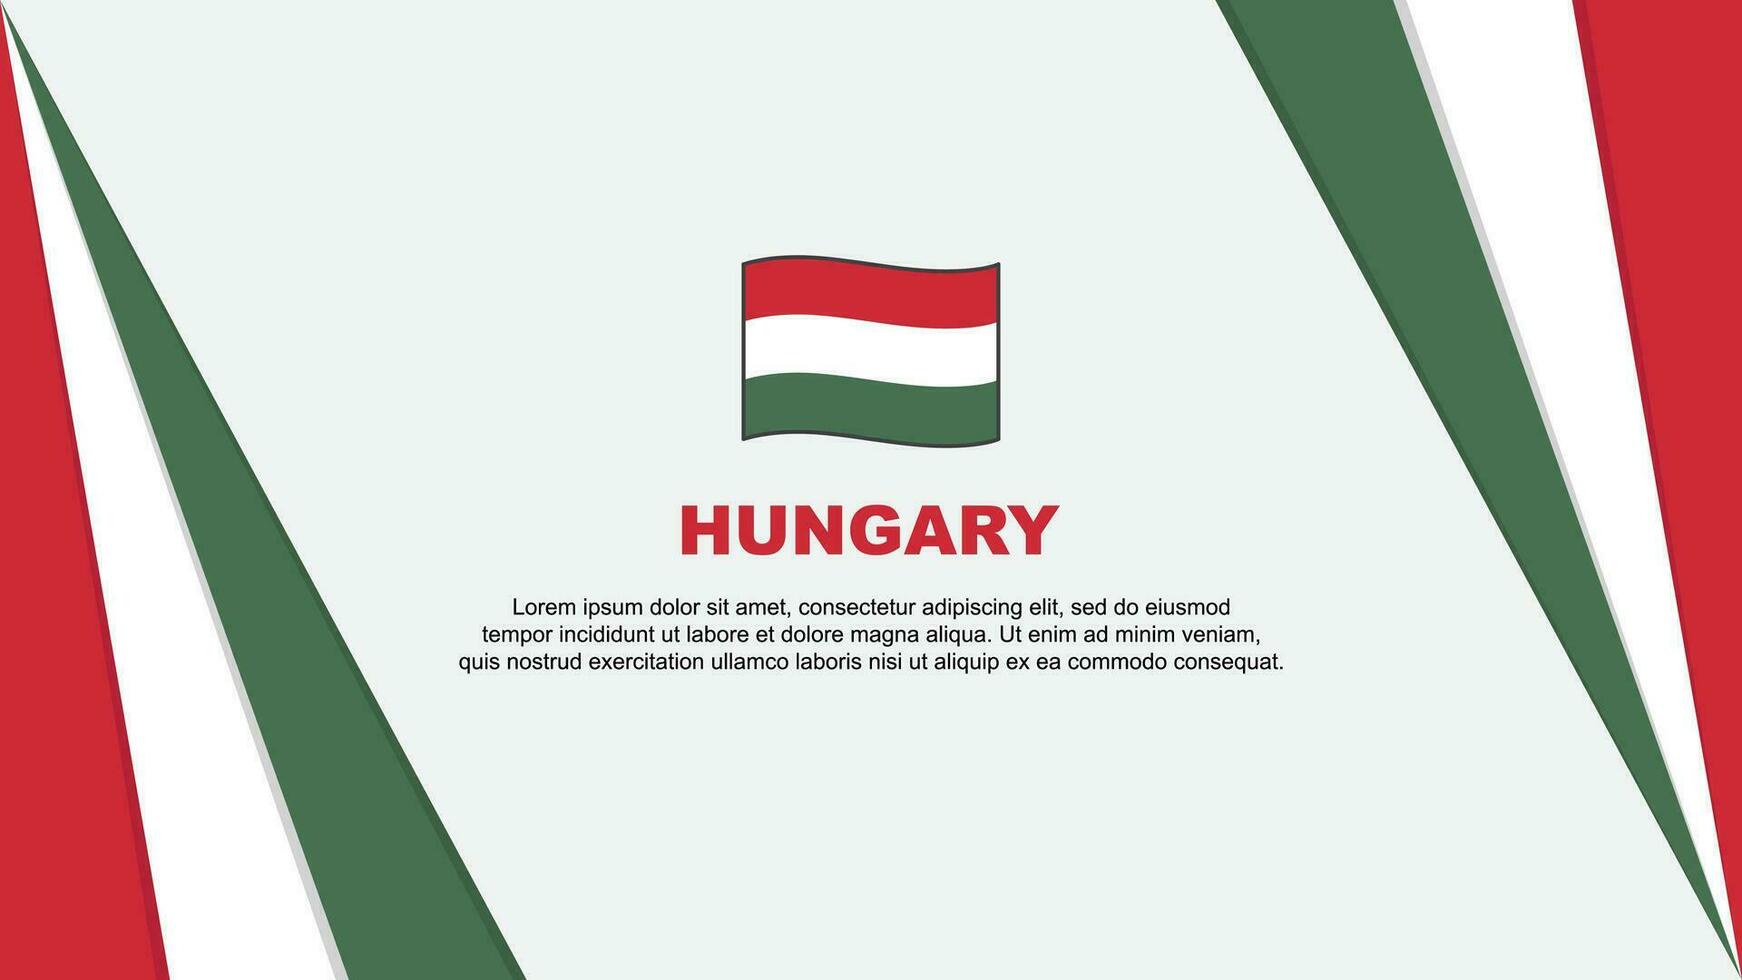 Hungary Flag Abstract Background Design Template. Hungary Independence Day Banner Cartoon Vector Illustration. Hungary Flag